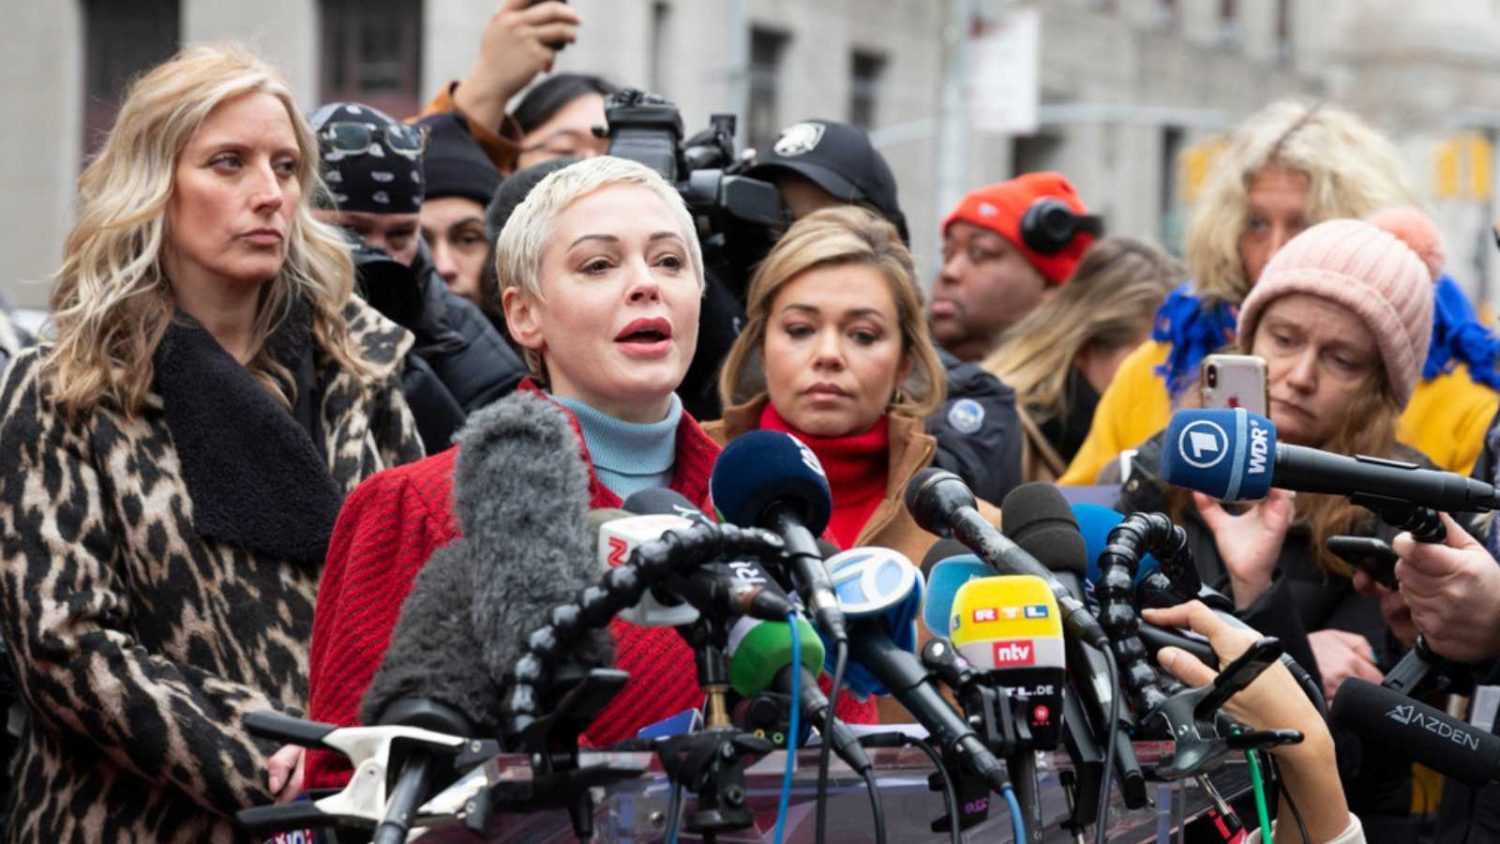 New York, NY - January 6, 2020: Actress Rose McGowan speaks during press conference on 1st day of Harvey Weinstein trial accused of rape and sexual misconduct at State Criminal Court